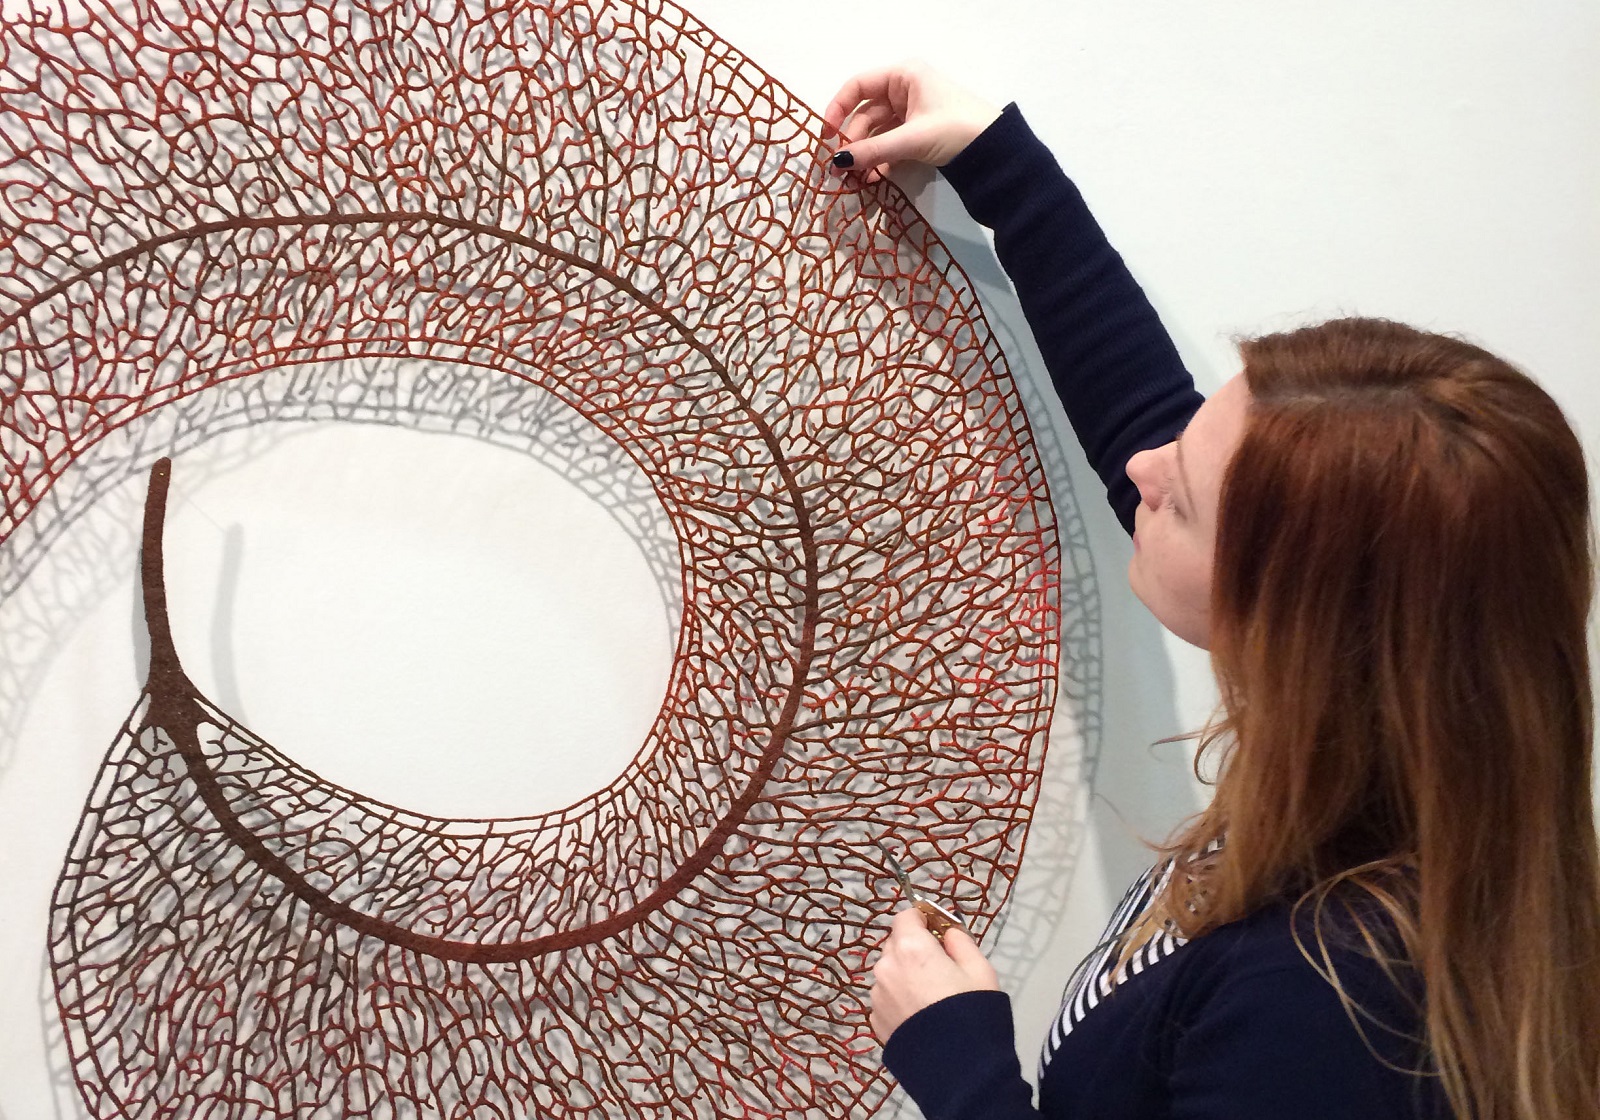 Meredith Woolnough, Scribbly Gum Leaf (installation). 2014. broidery on  water-soluble fabric. Embroidery thread and pins. 